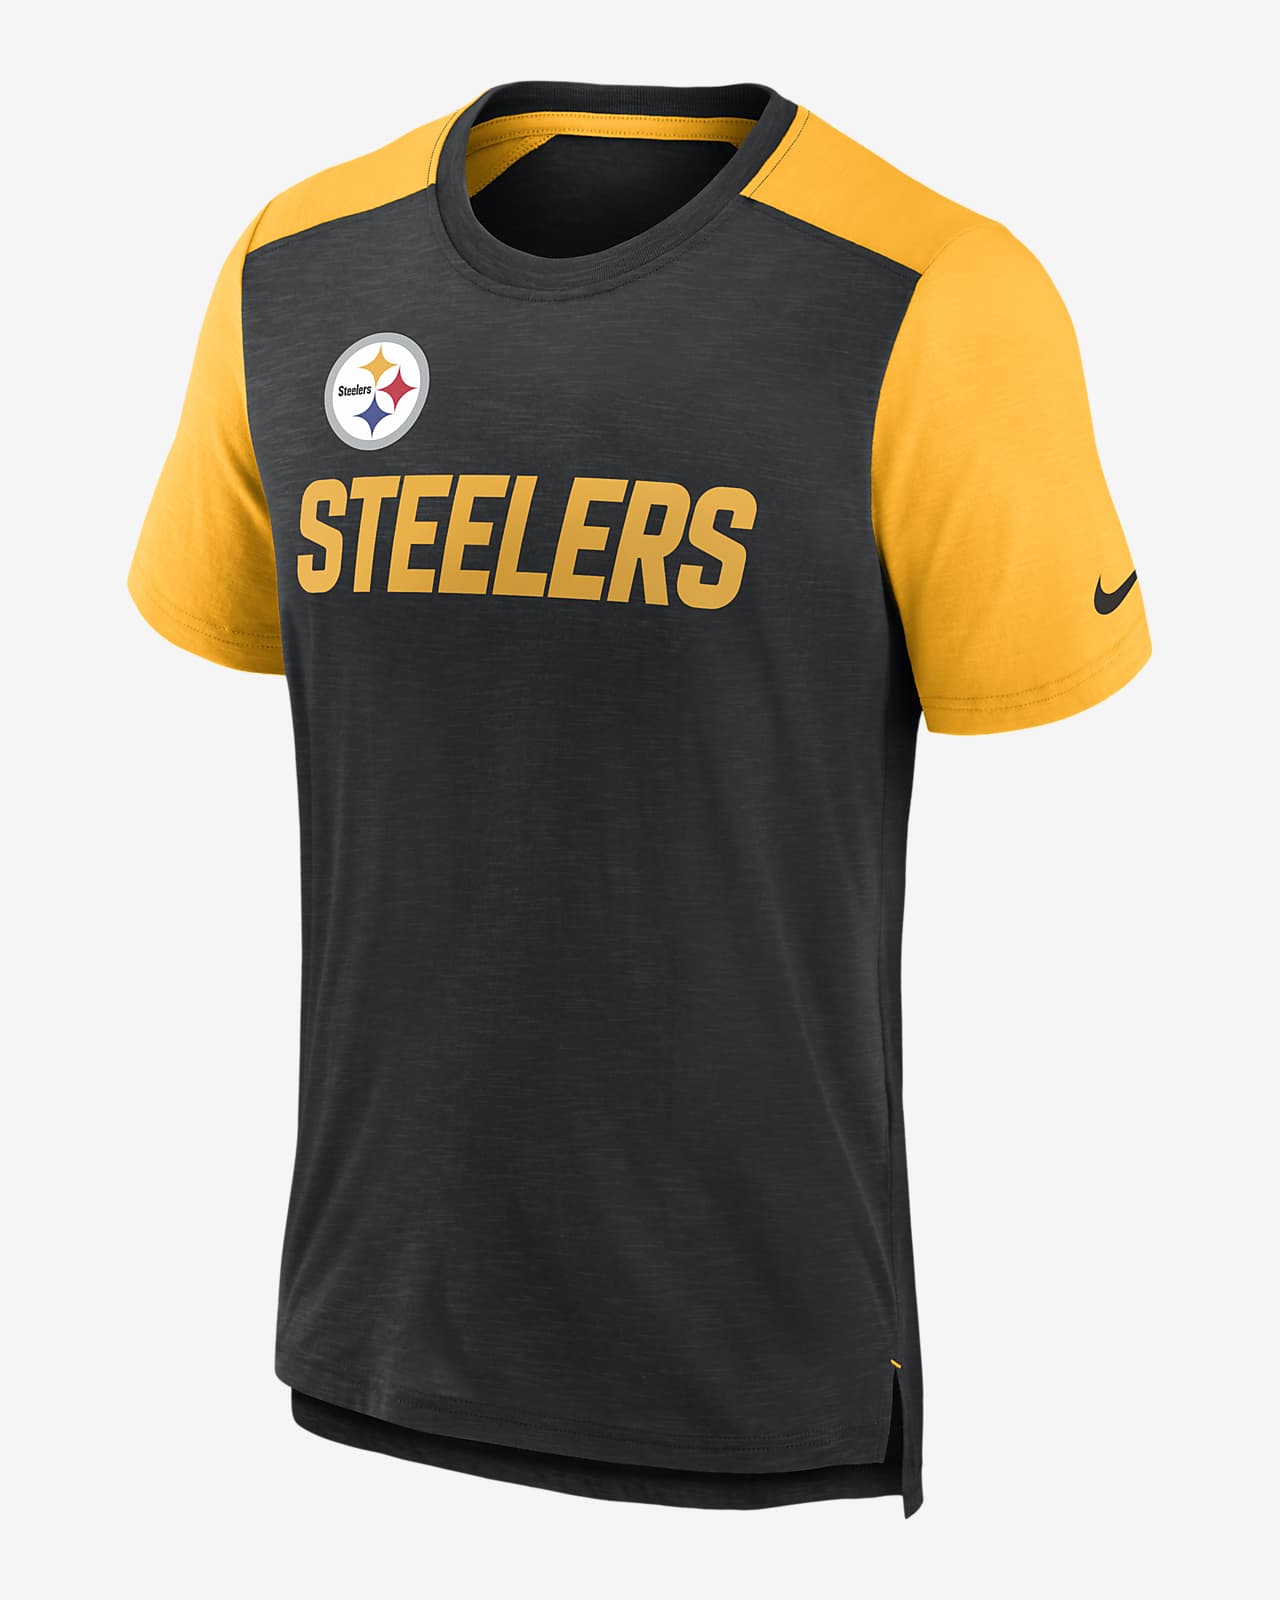 black and yellow steelers shirt